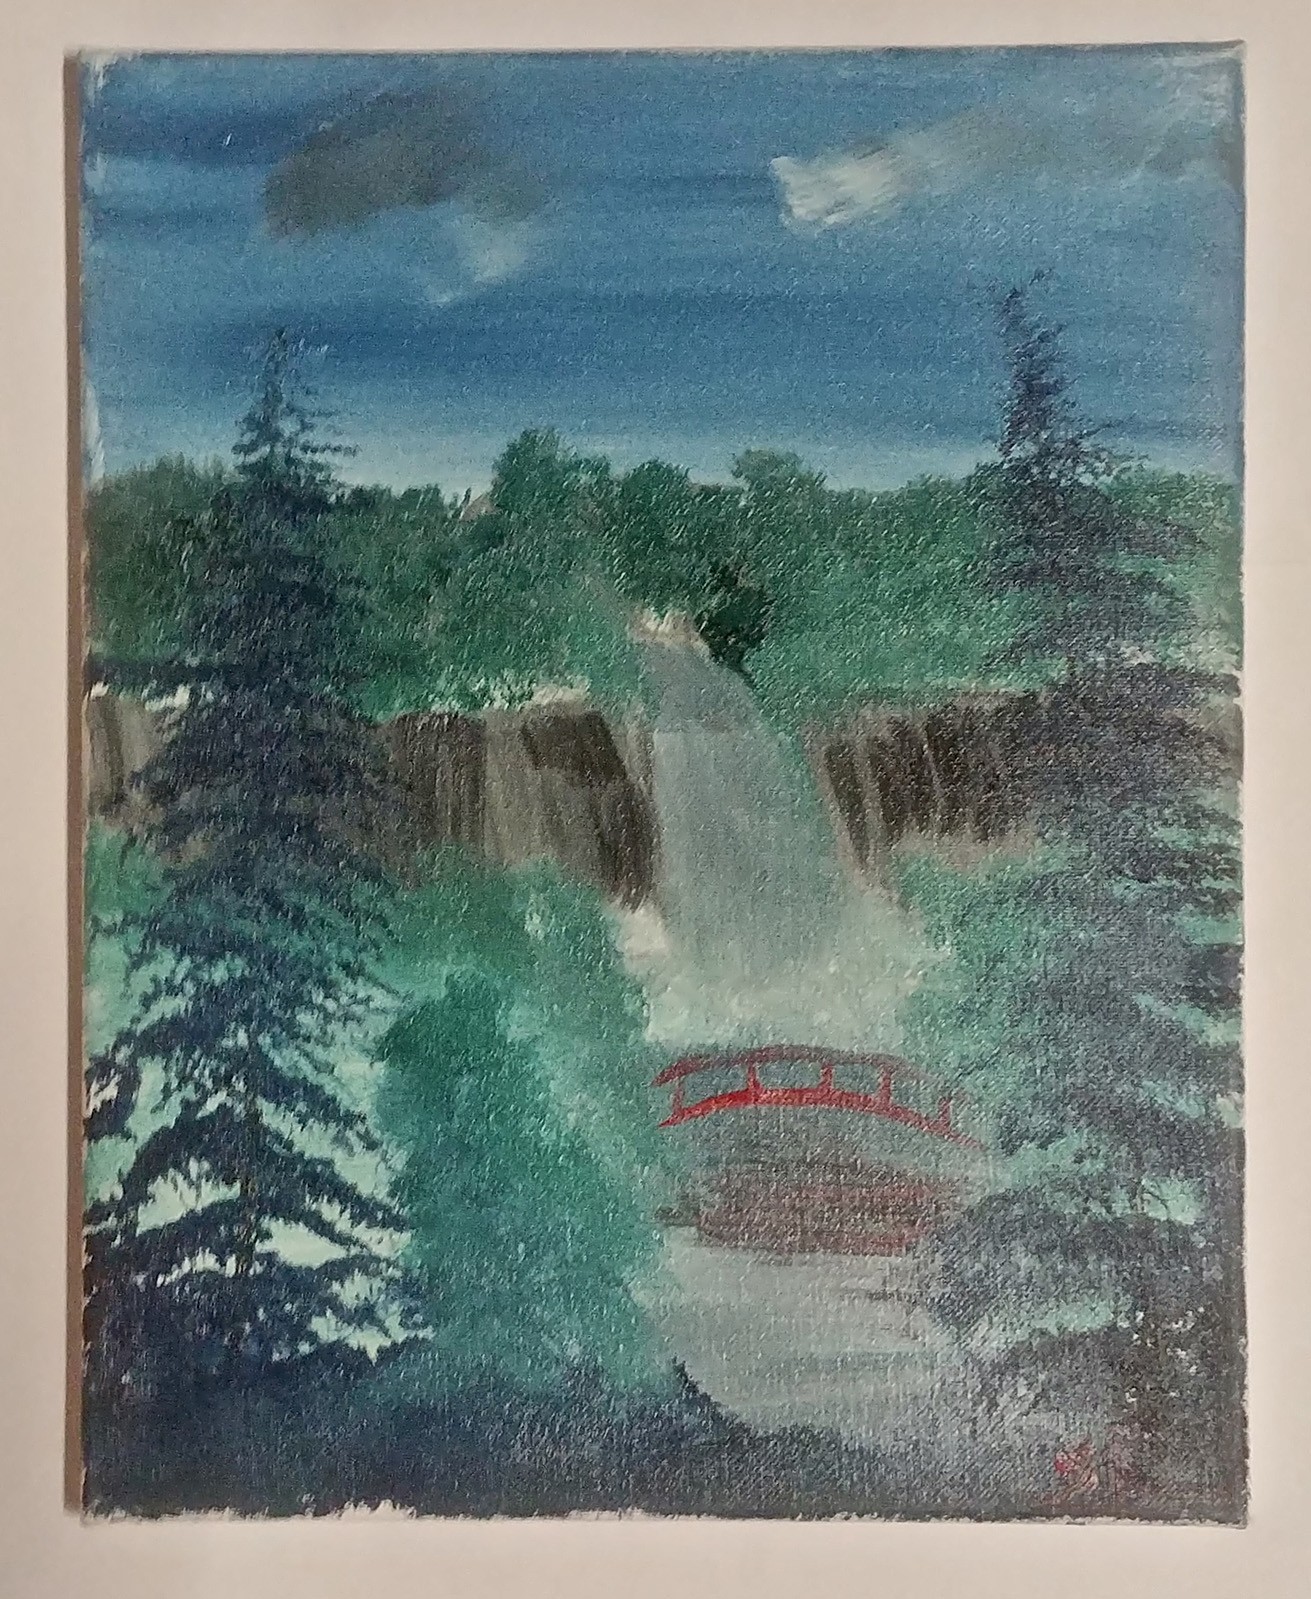 “Bridge and Waterfall” by Samuel Robinson, oil on canvas